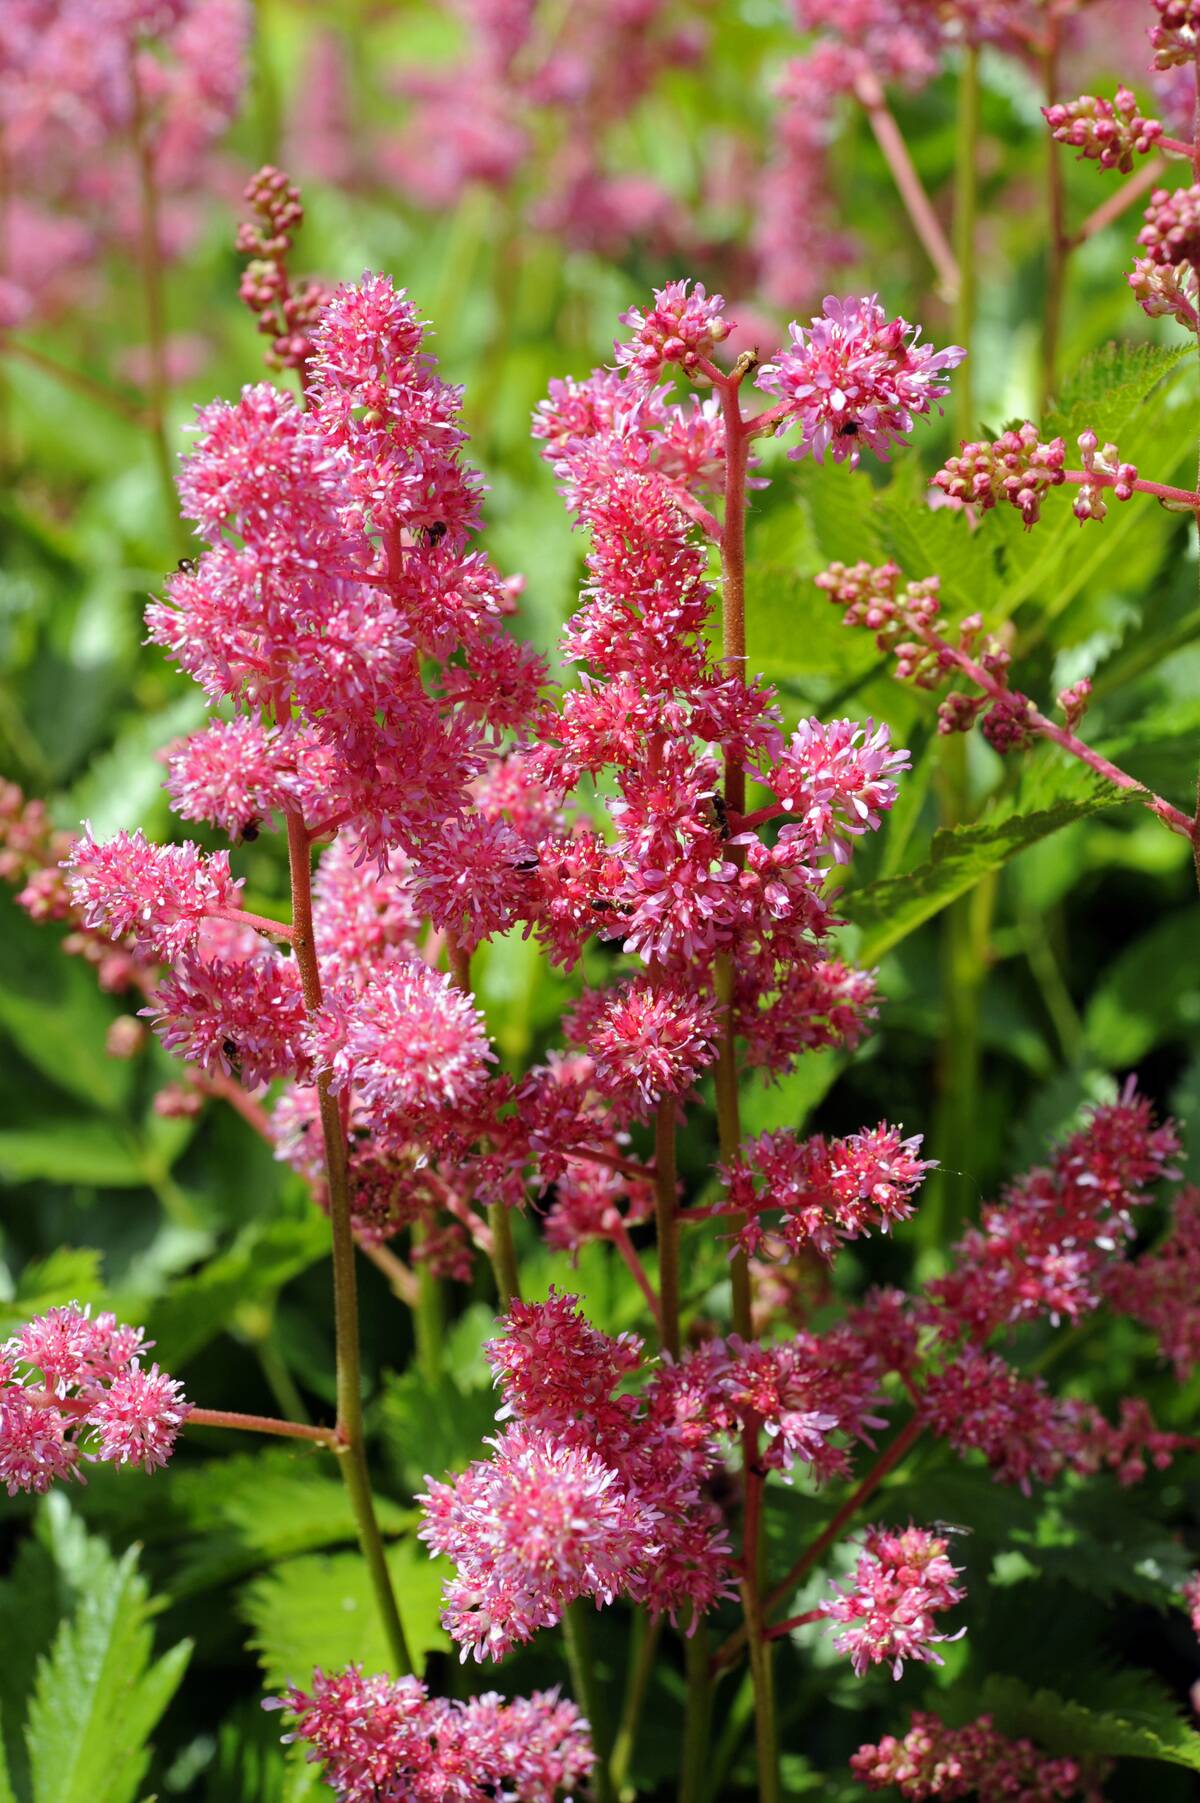 <p>Astilbe plants are an excellent addition to any garden for both amateur and professional gardeners. This perennial plant is known for its long-lasting feathery flowers that come in shades of pink, white, red, and lavender. </p> <p>Astilbes are easy to grow and thrive in moist soil with partial shade, making them ideal for planting in shaded areas. With proper care, these plants can last for years, providing a beautiful burst of color to any garden. </p>